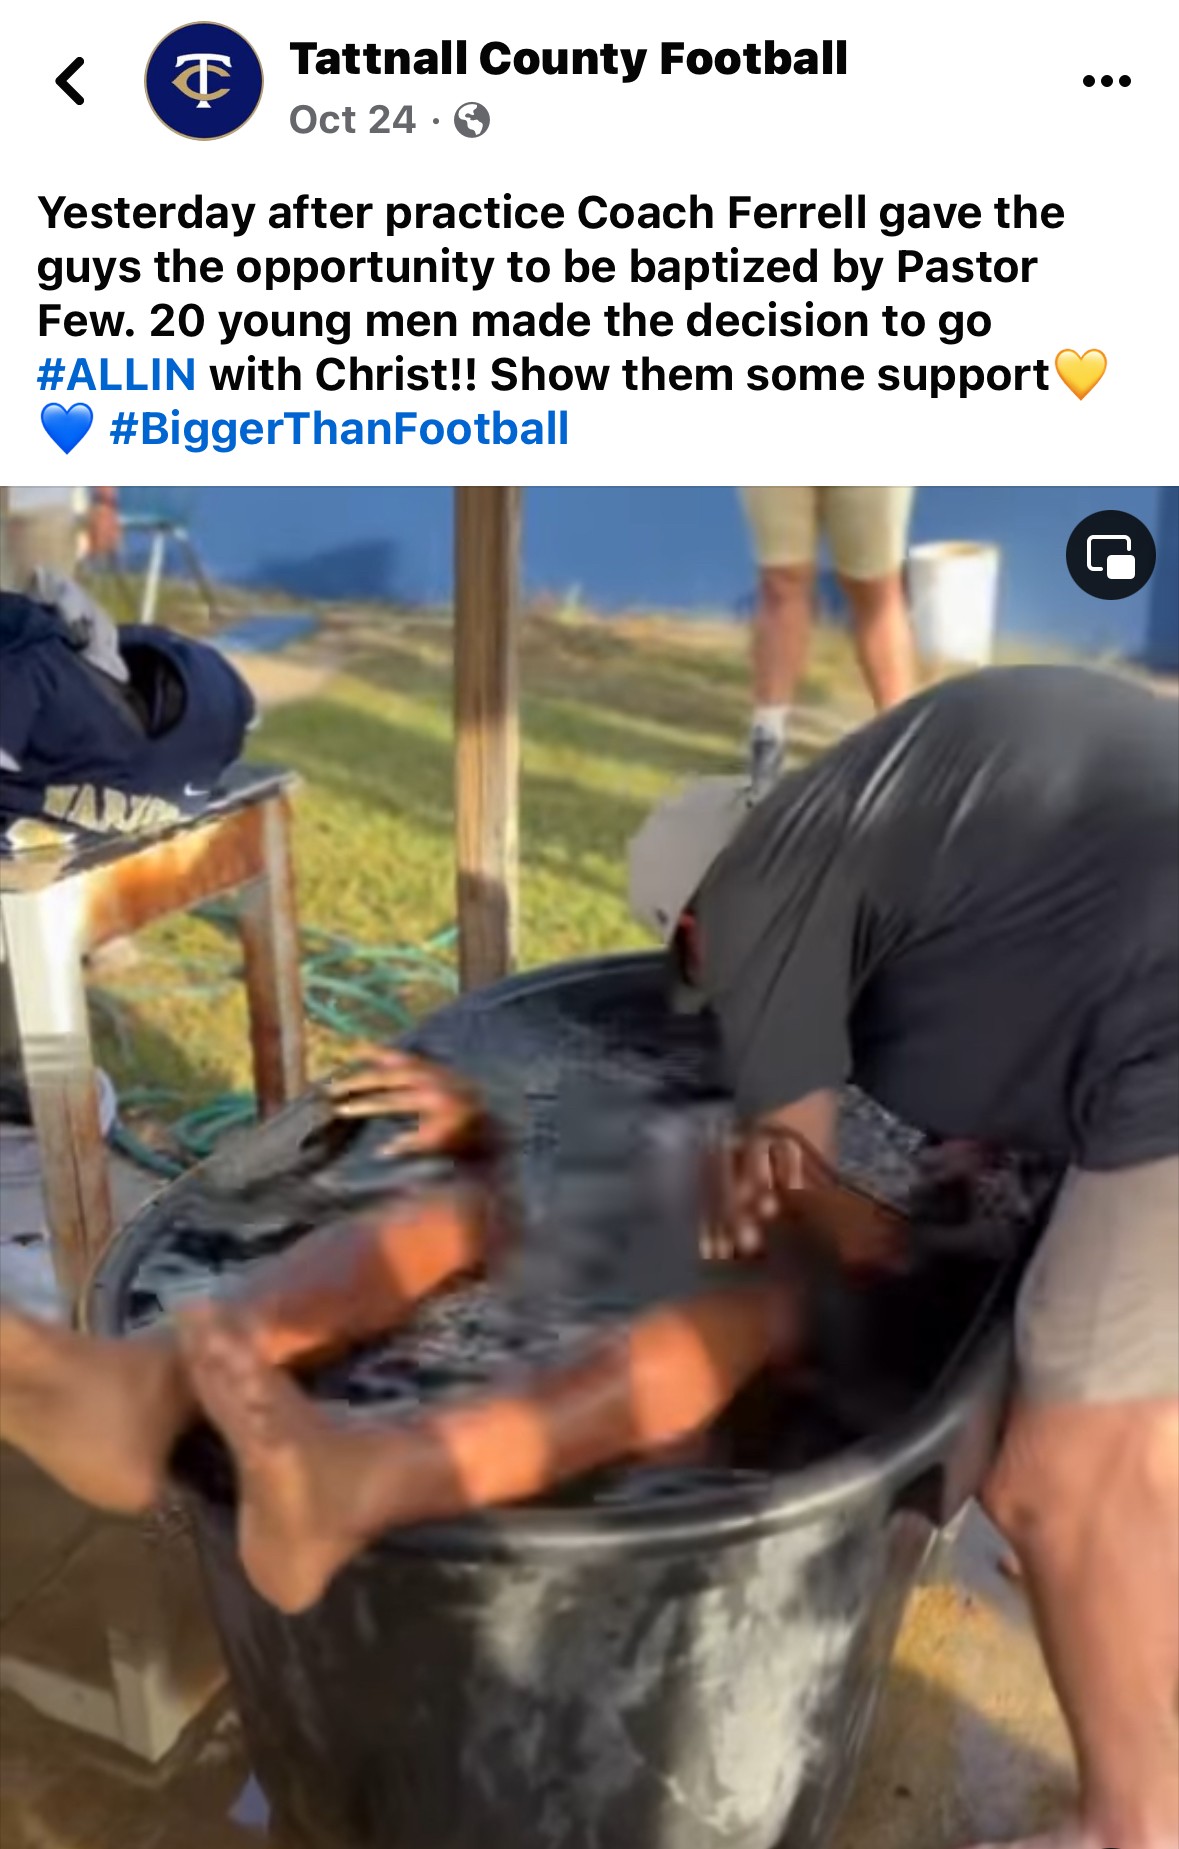 The Oct. 24 post w/video showing TCHS players being baptized by Pastor Gary Few.